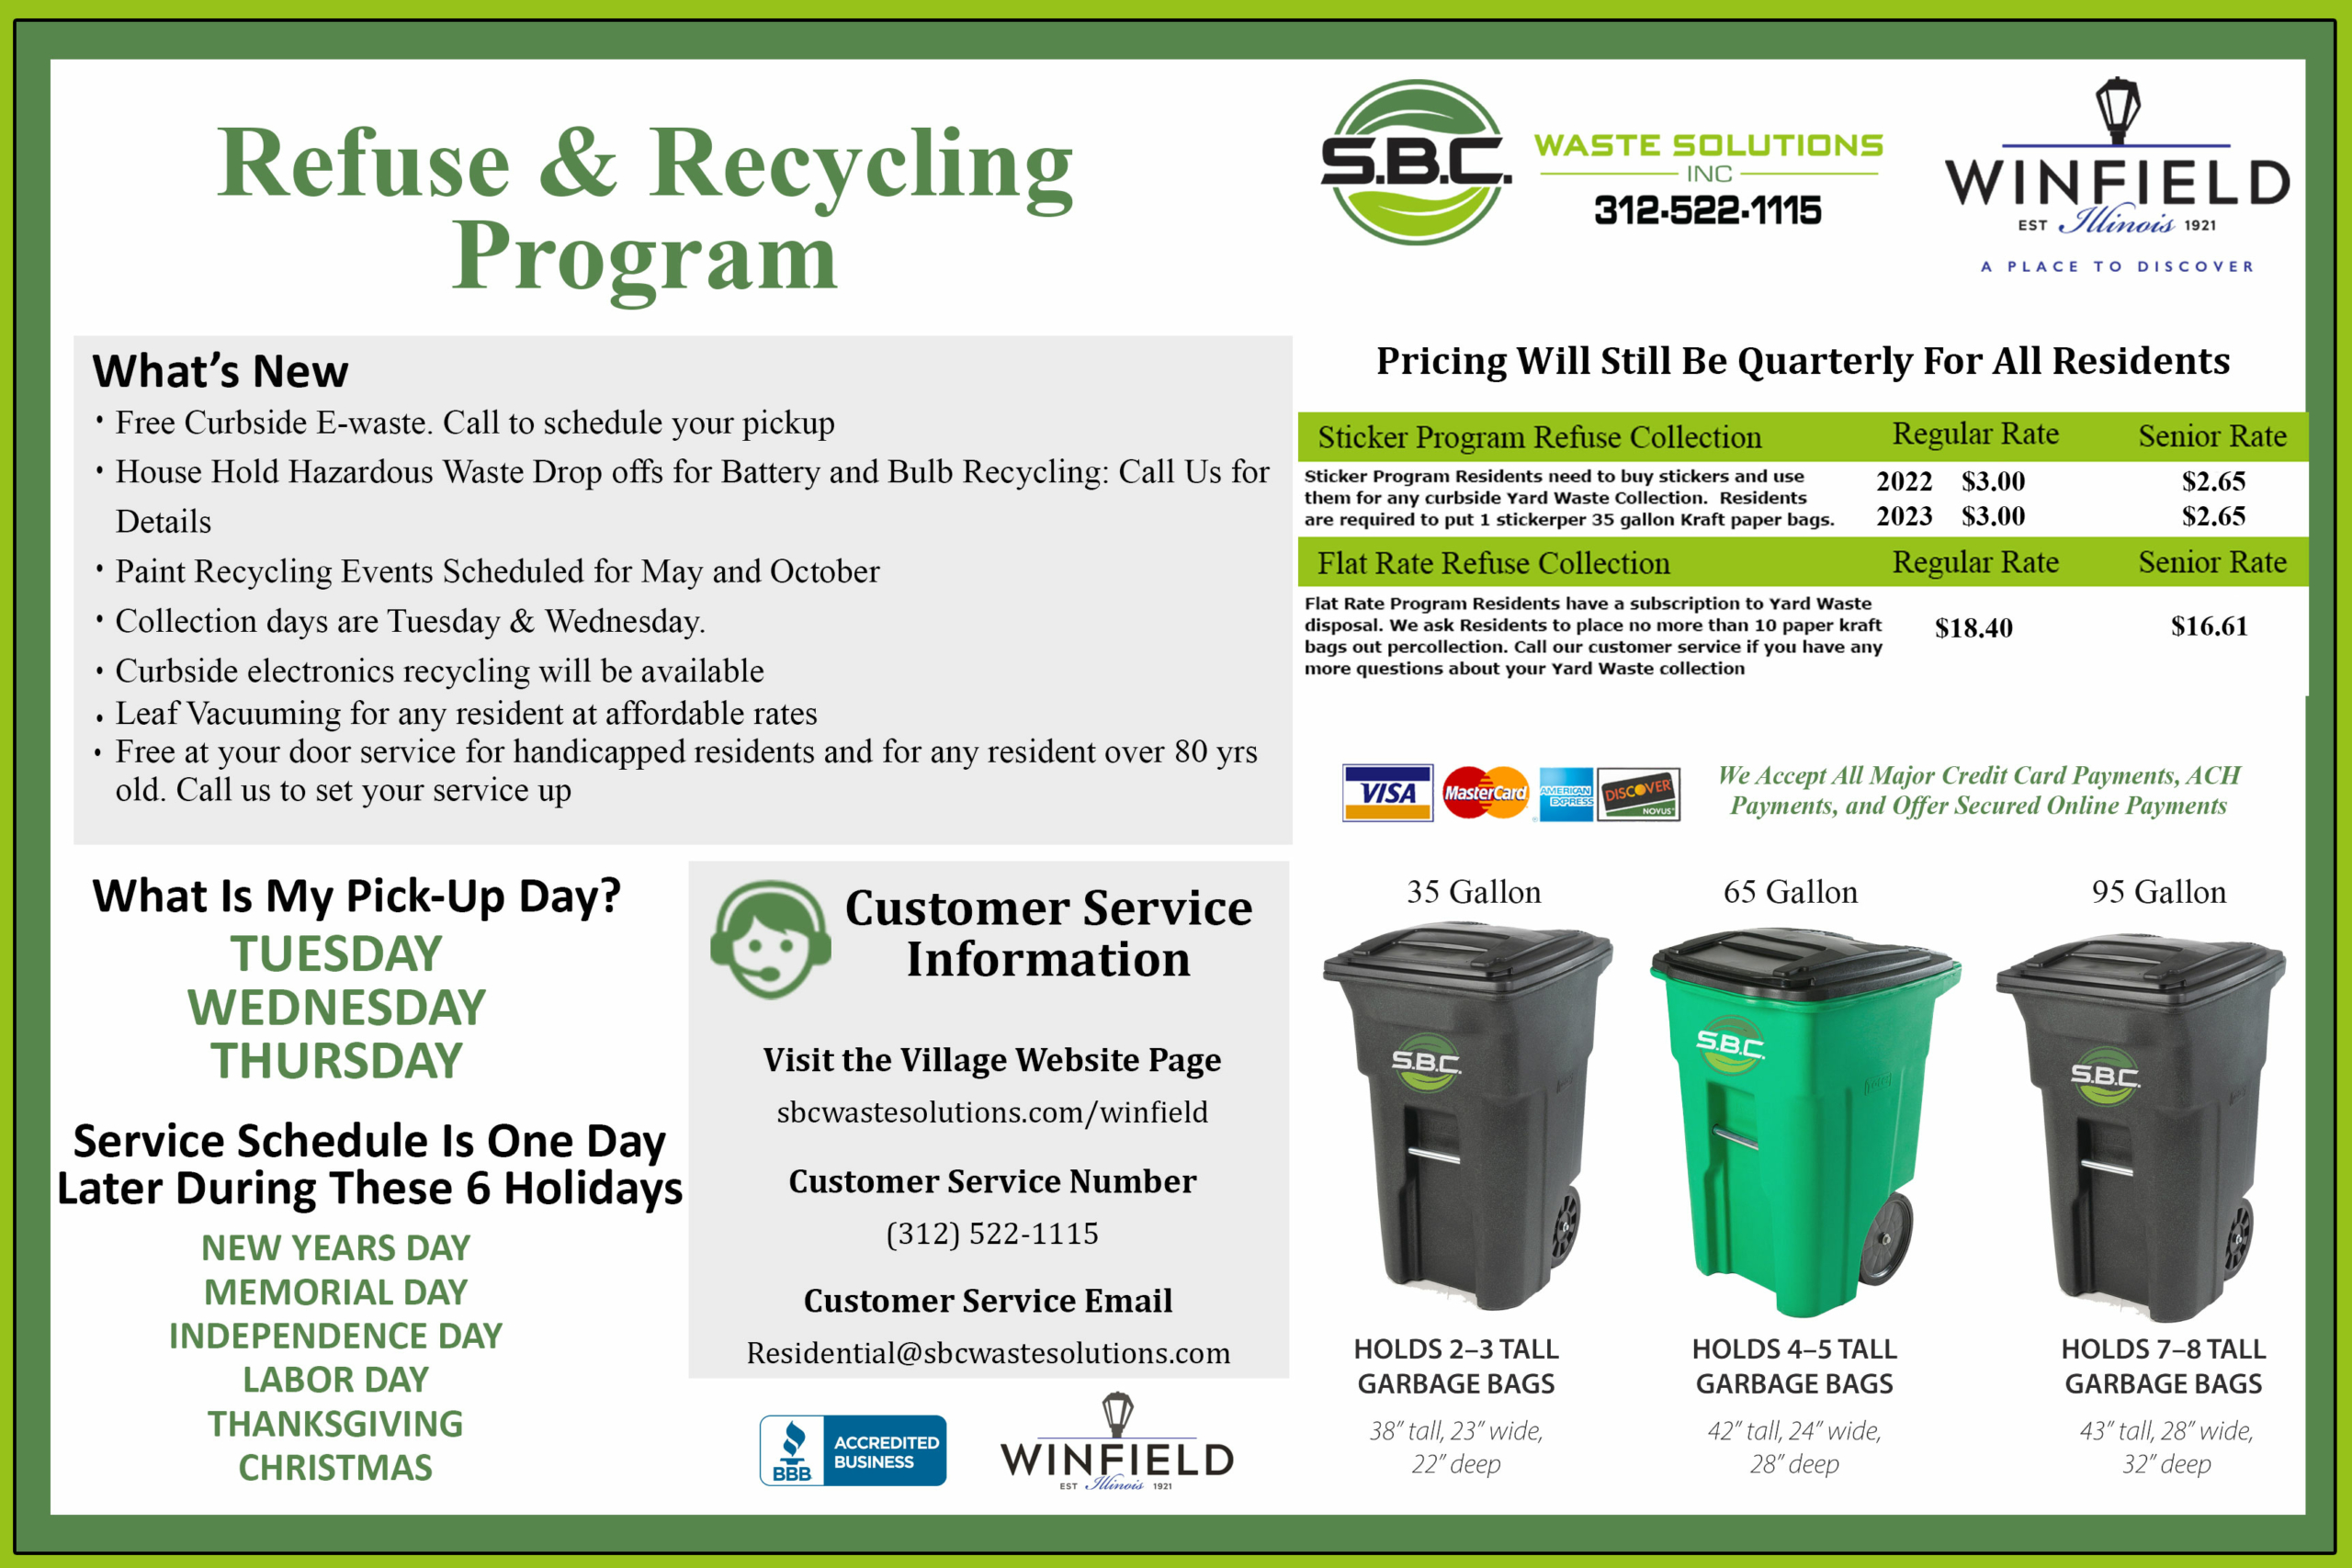 sbc waste solutions Winfield information list